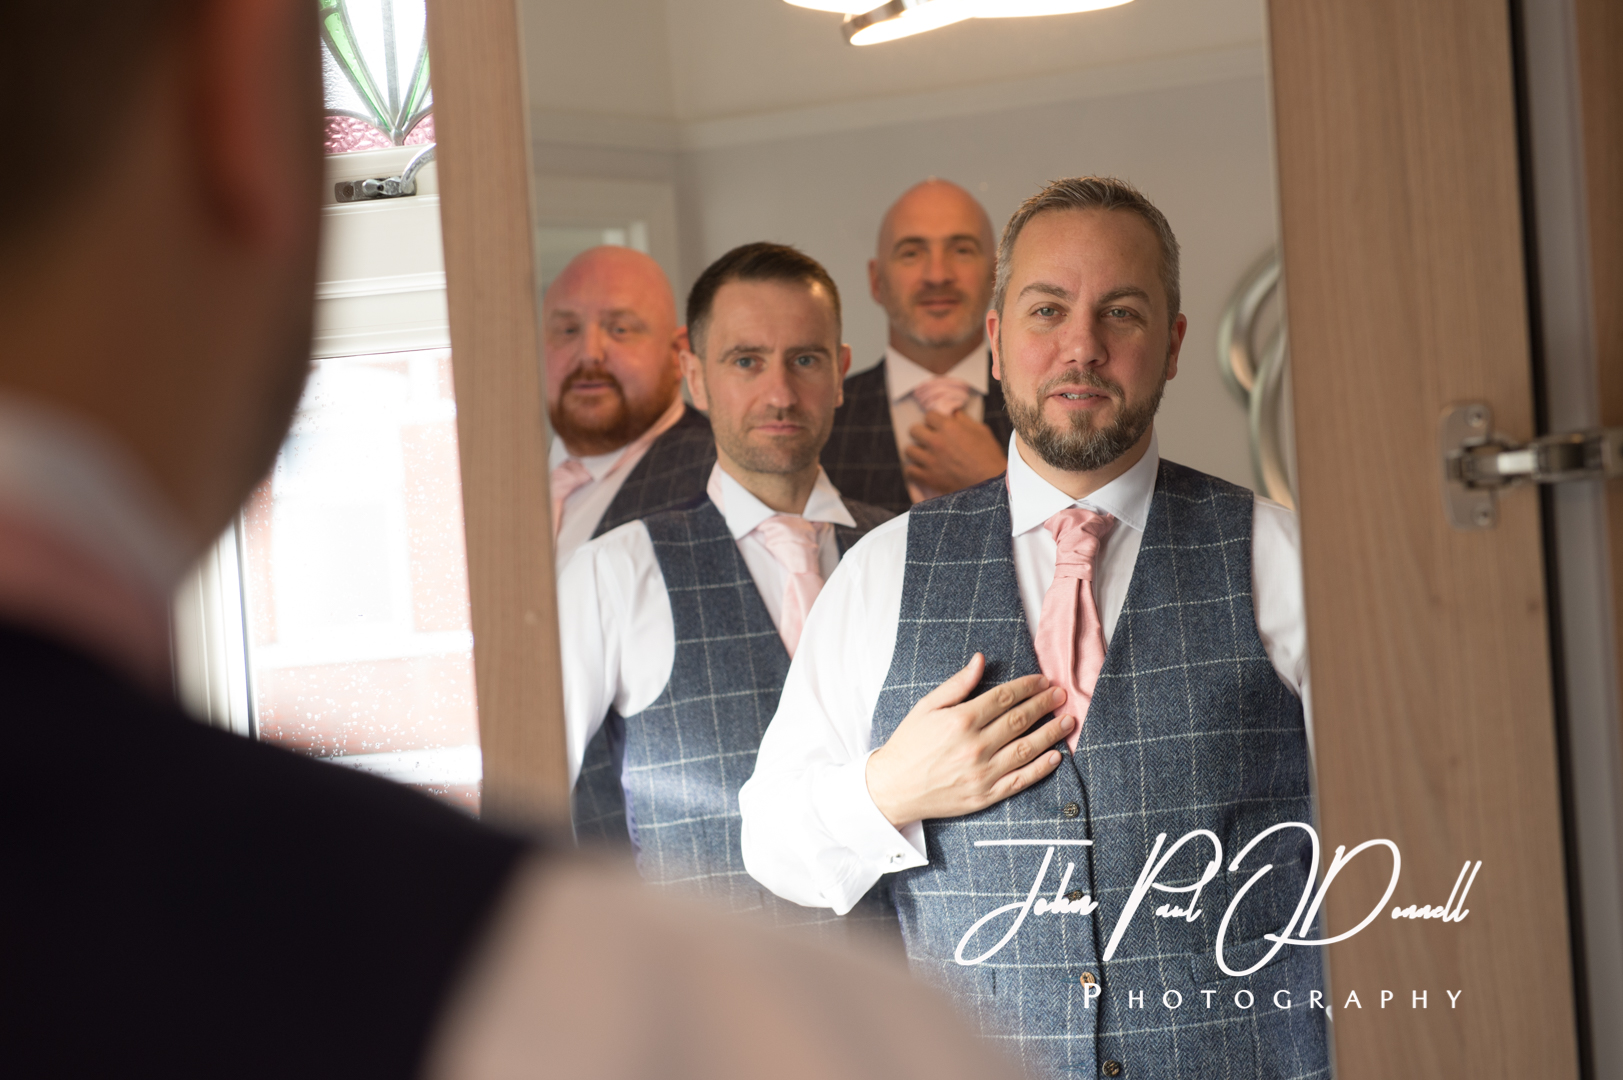 The Gaynes Park Wedding of Laura and Richard by John Paul ODonnell